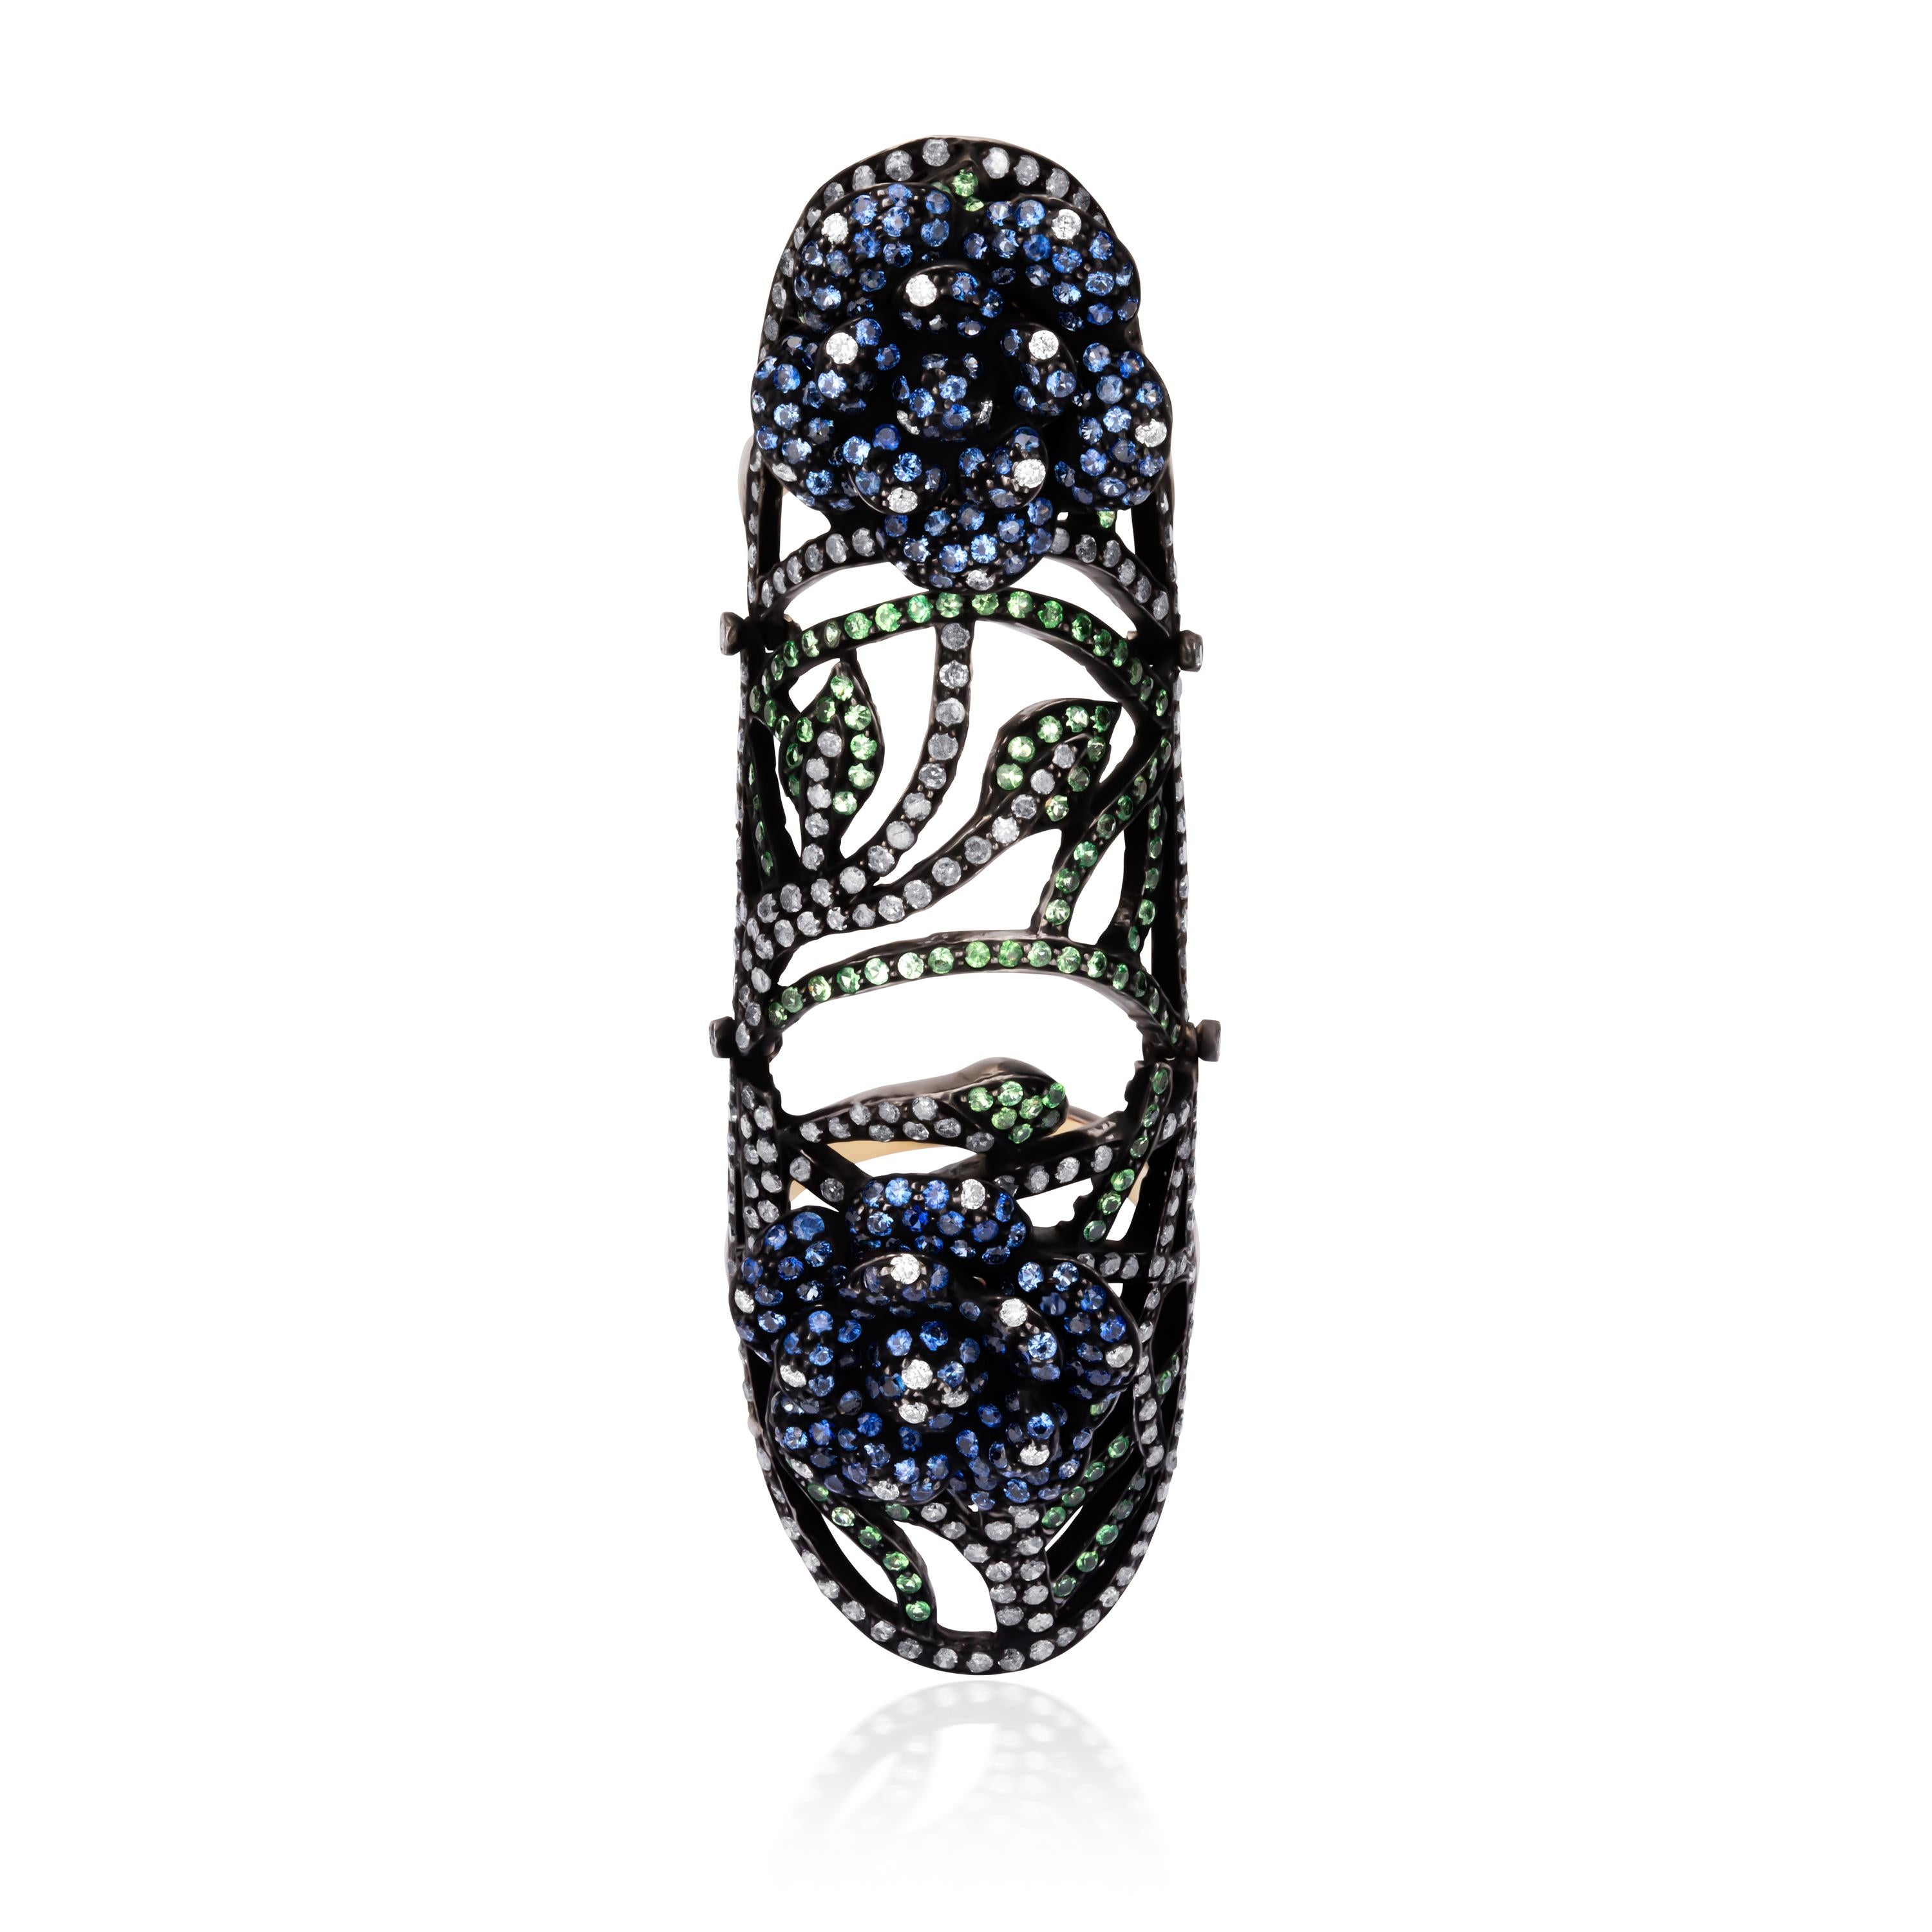 An entrancing design! This classic Victorian cluster ring features sparkling blue sapphires embellished in rose motifs sitting atop a pierced design of tsavorites and diamonds. Handcrafted in 18K gold and 925 sterling silver this ring is accompanied